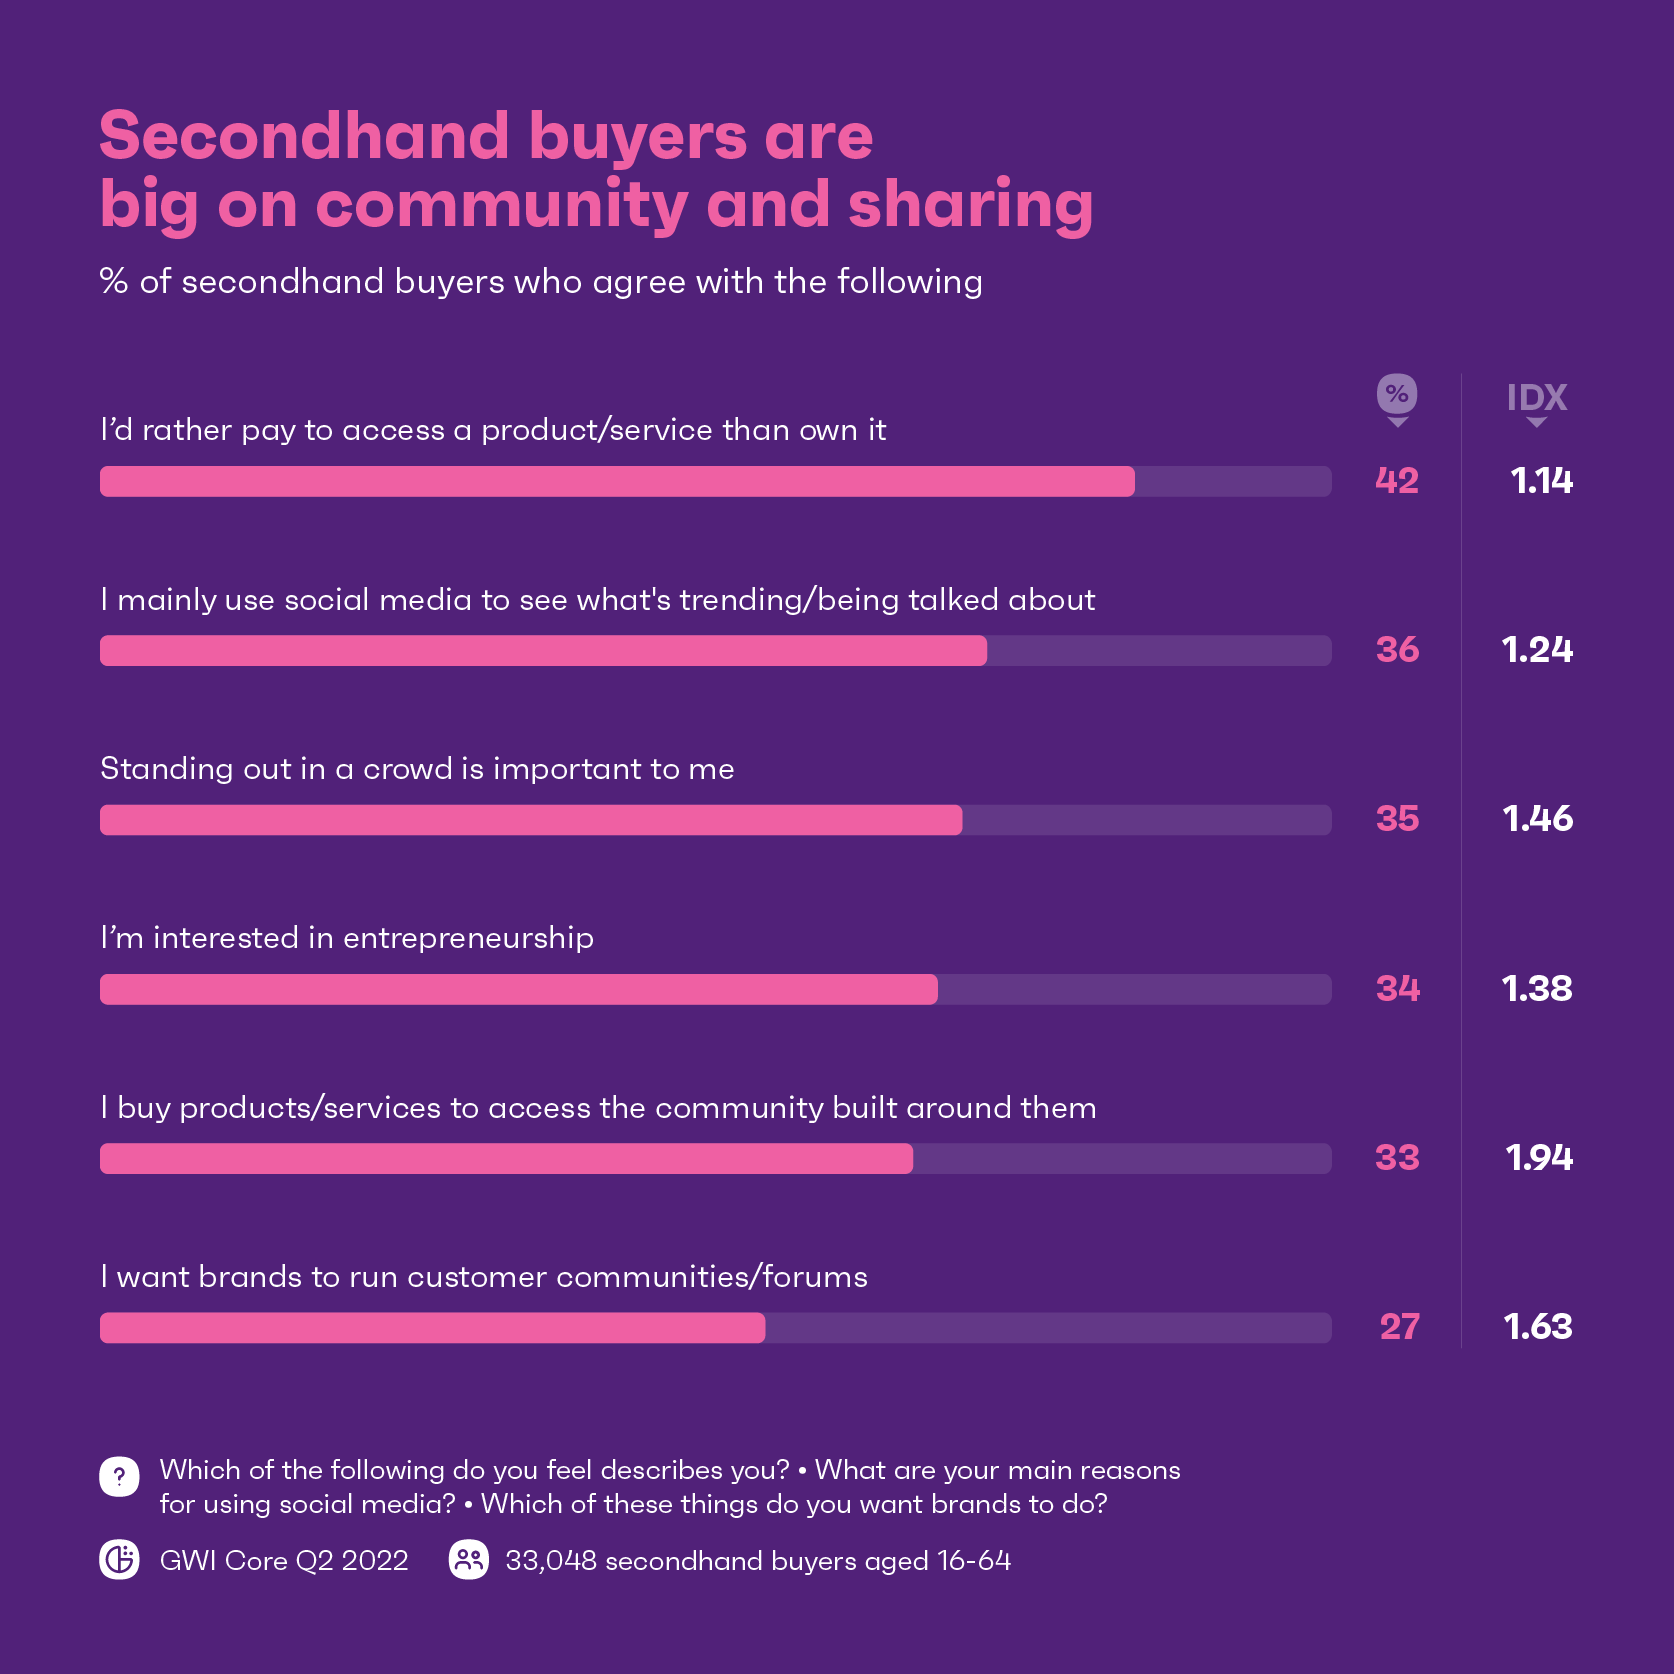 Chart showing second hand buyers values, interests and reasons for using social media